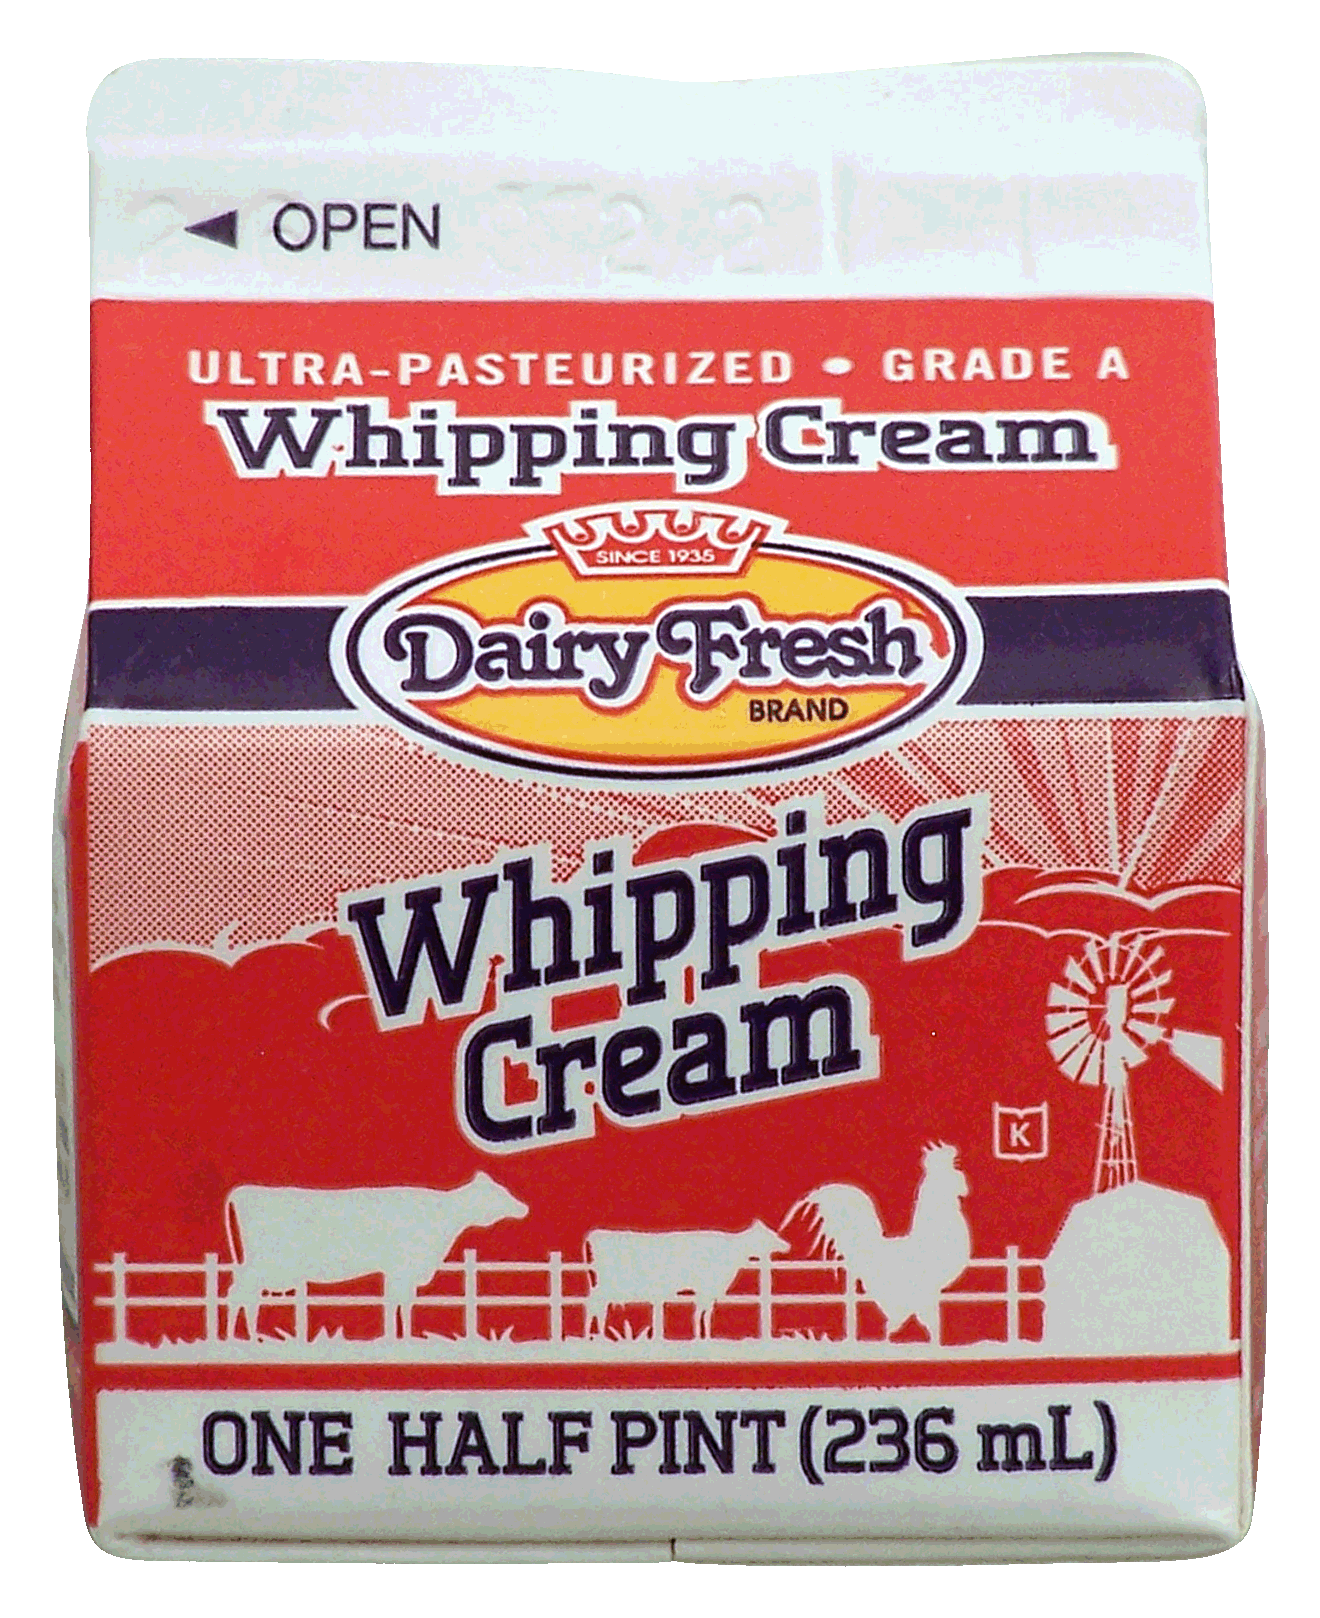 Dairy Fresh  whipping cream, ultra-pasteurized, grade a Full-Size Picture